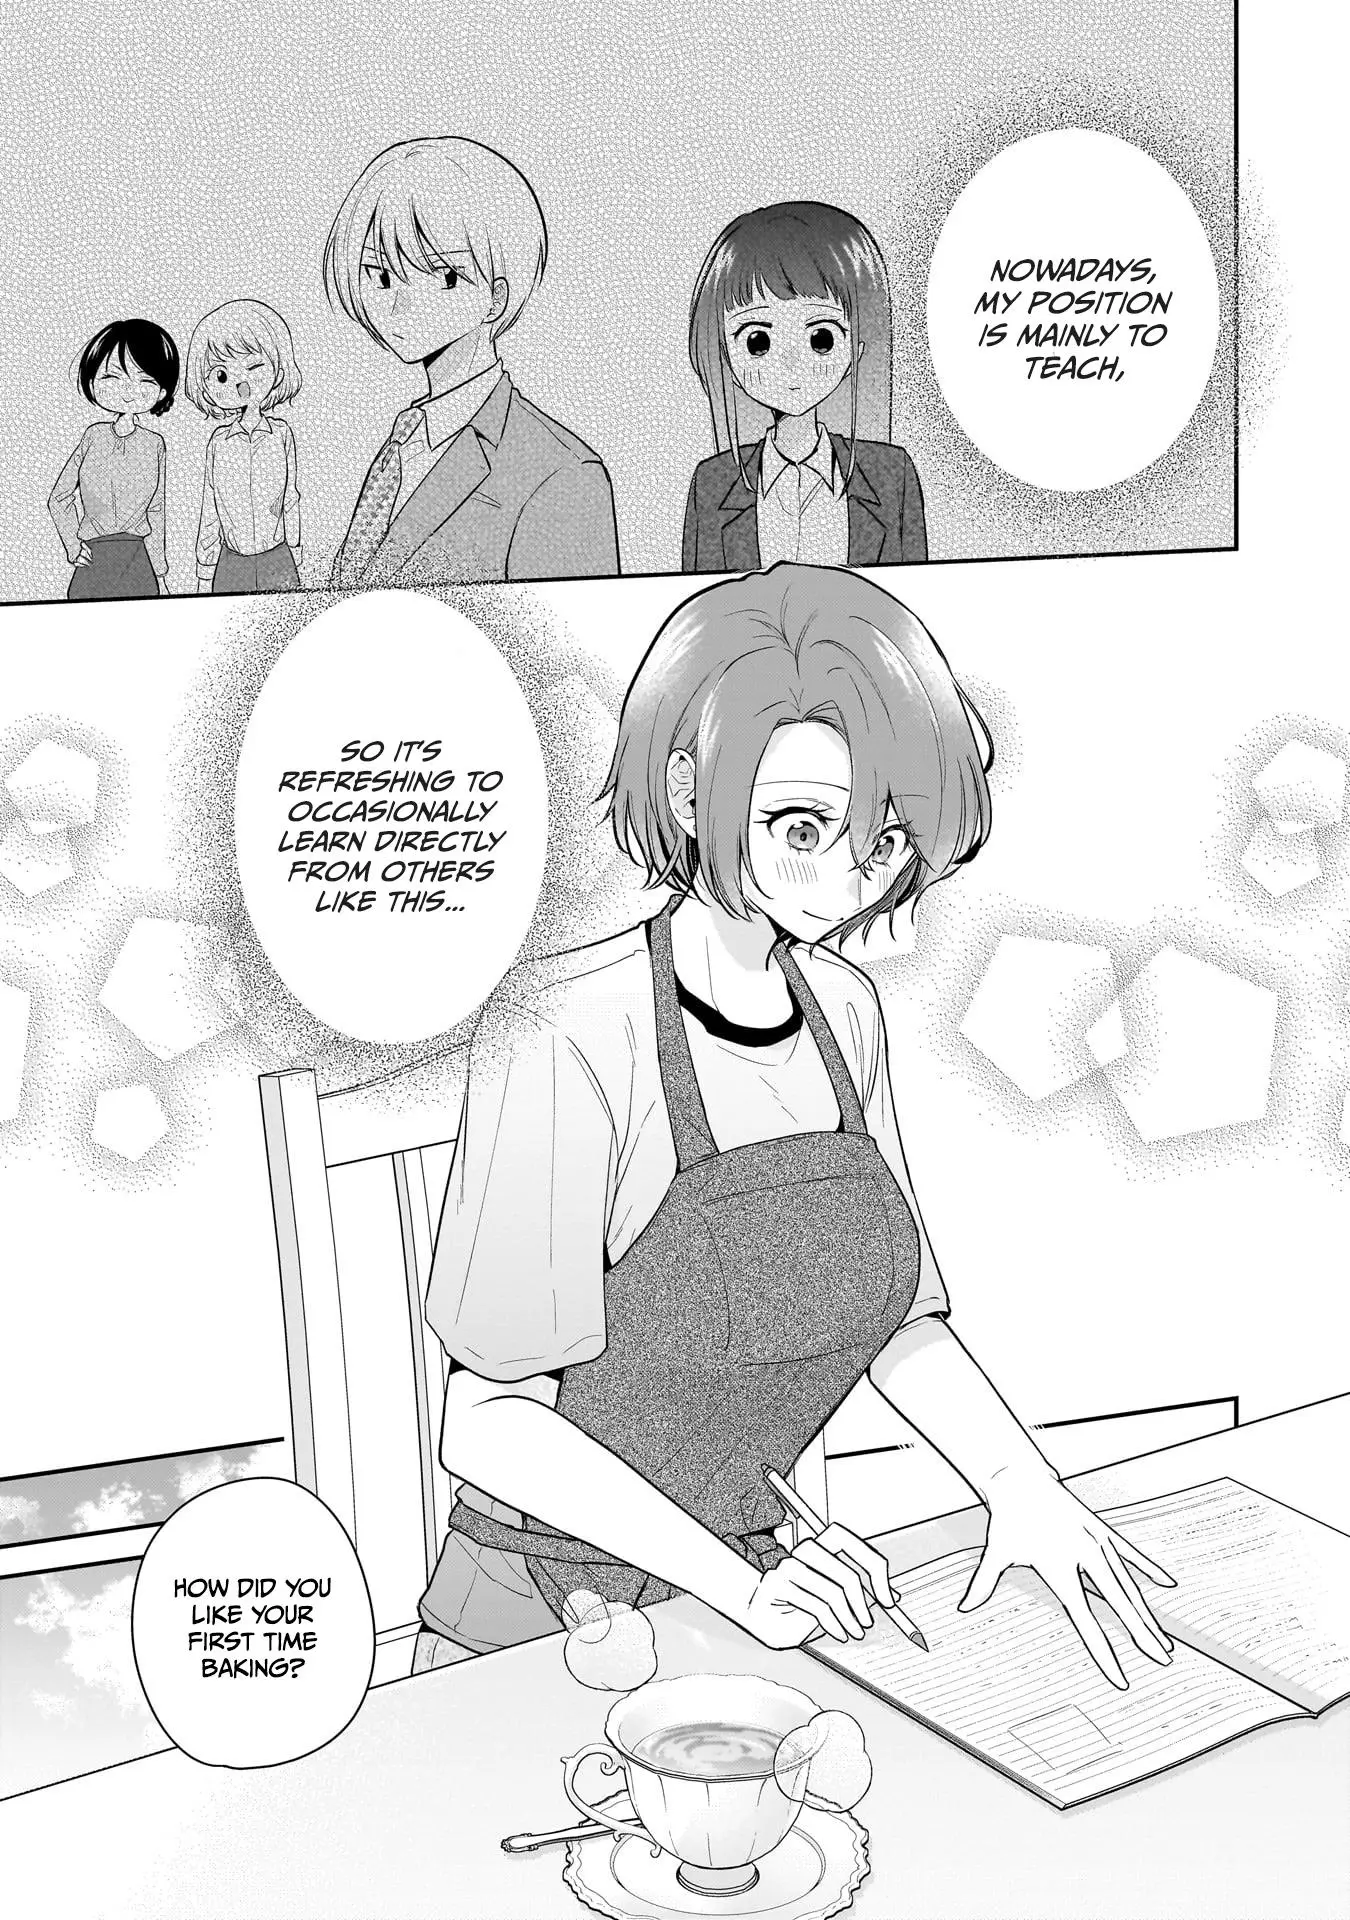 Misato-San Is A Bit Cold Towards Her Boss Who Pampers - 11 page 11-e73a94b8